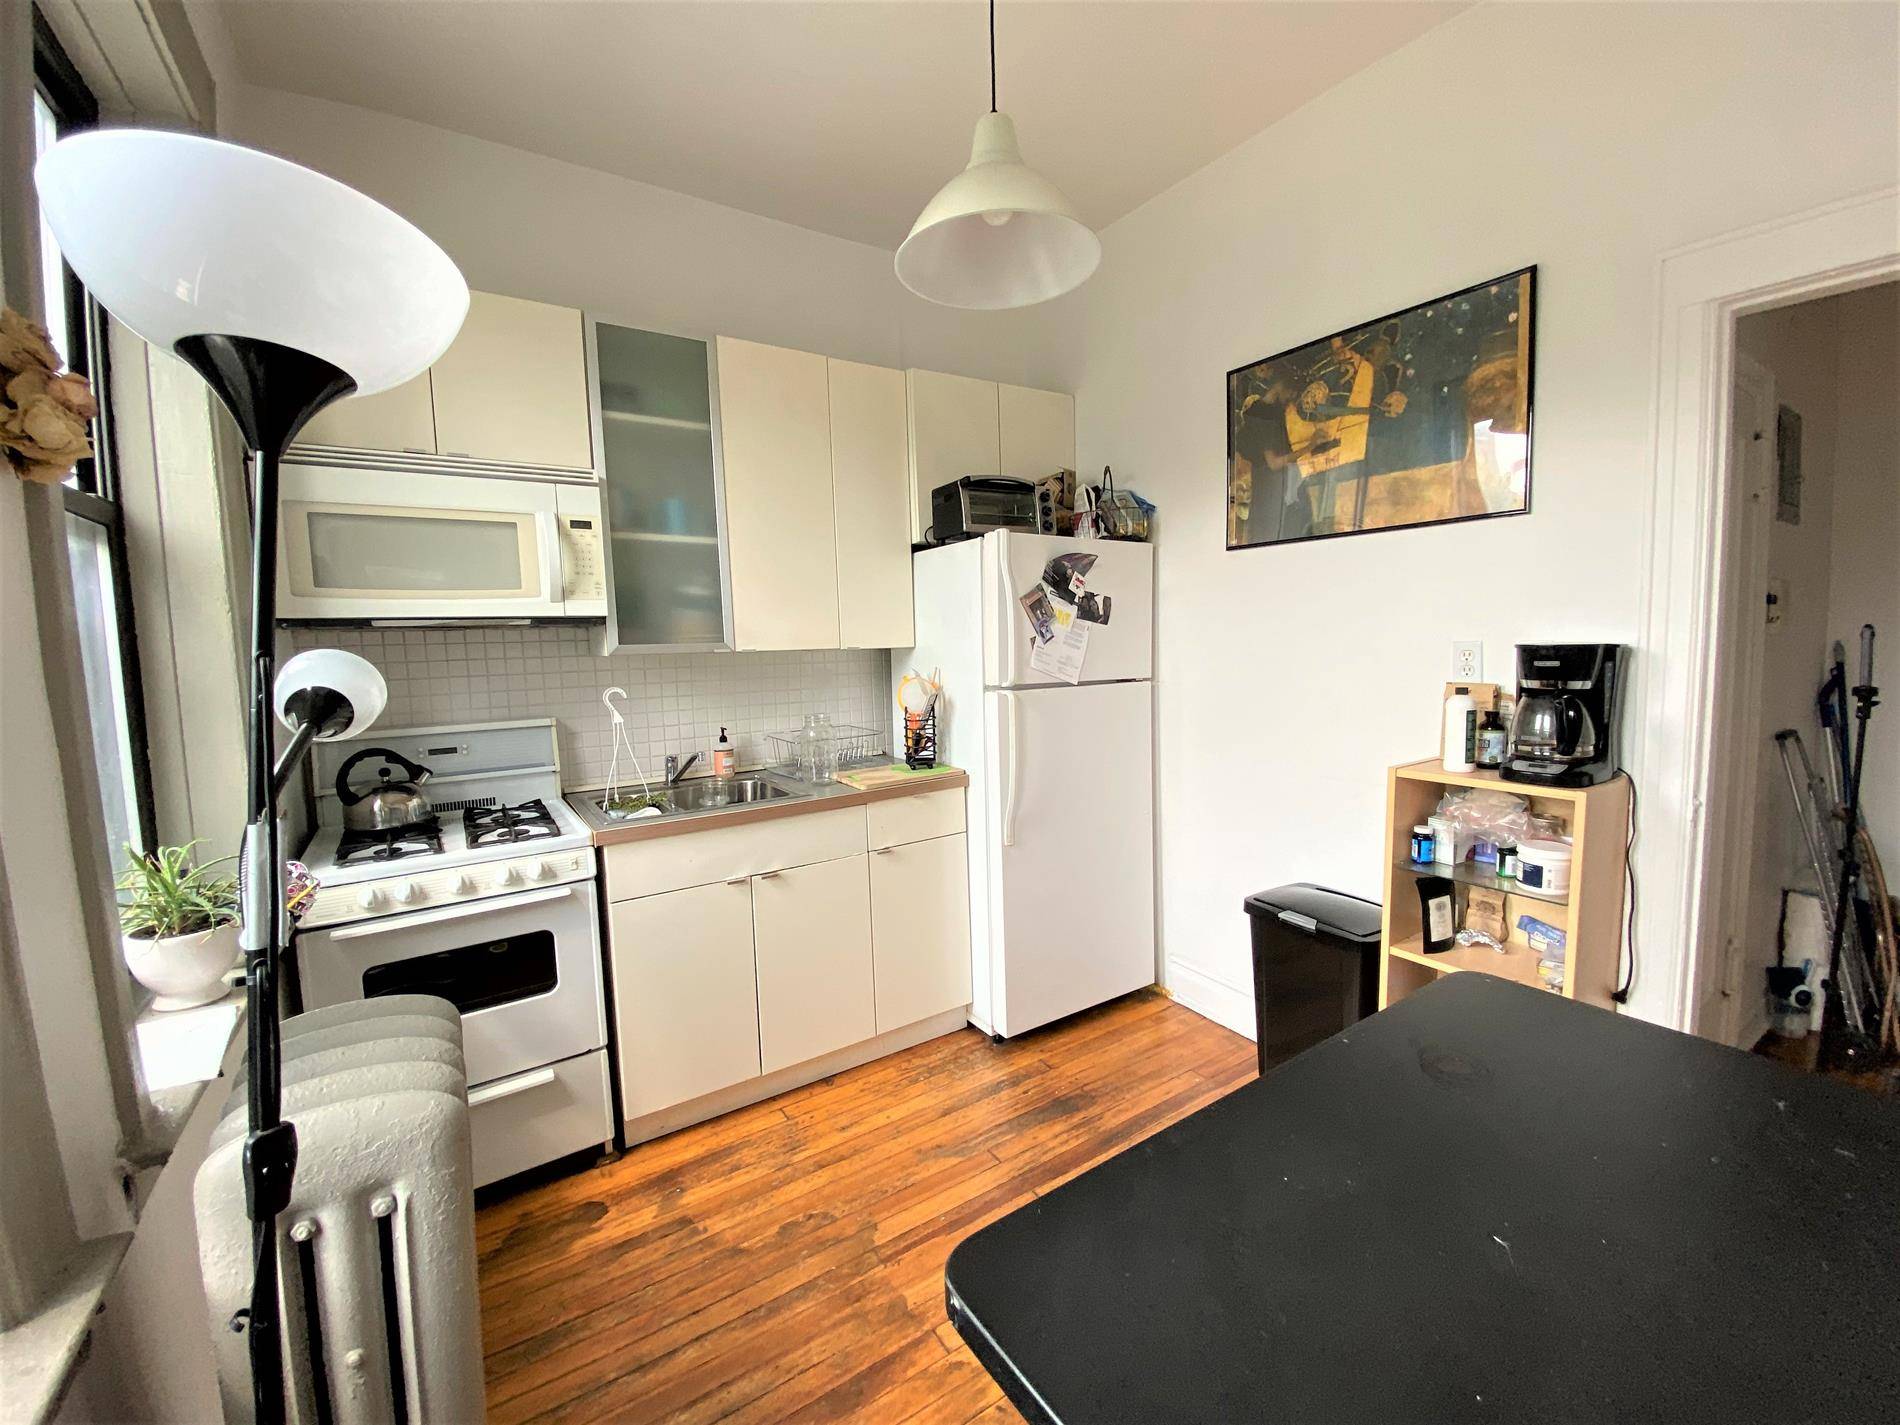 In the heart of trendy and hip Williamsburg, near McCarren Park, walking distance to 1 block G and L trains, bars, restaurants and supermarkets.